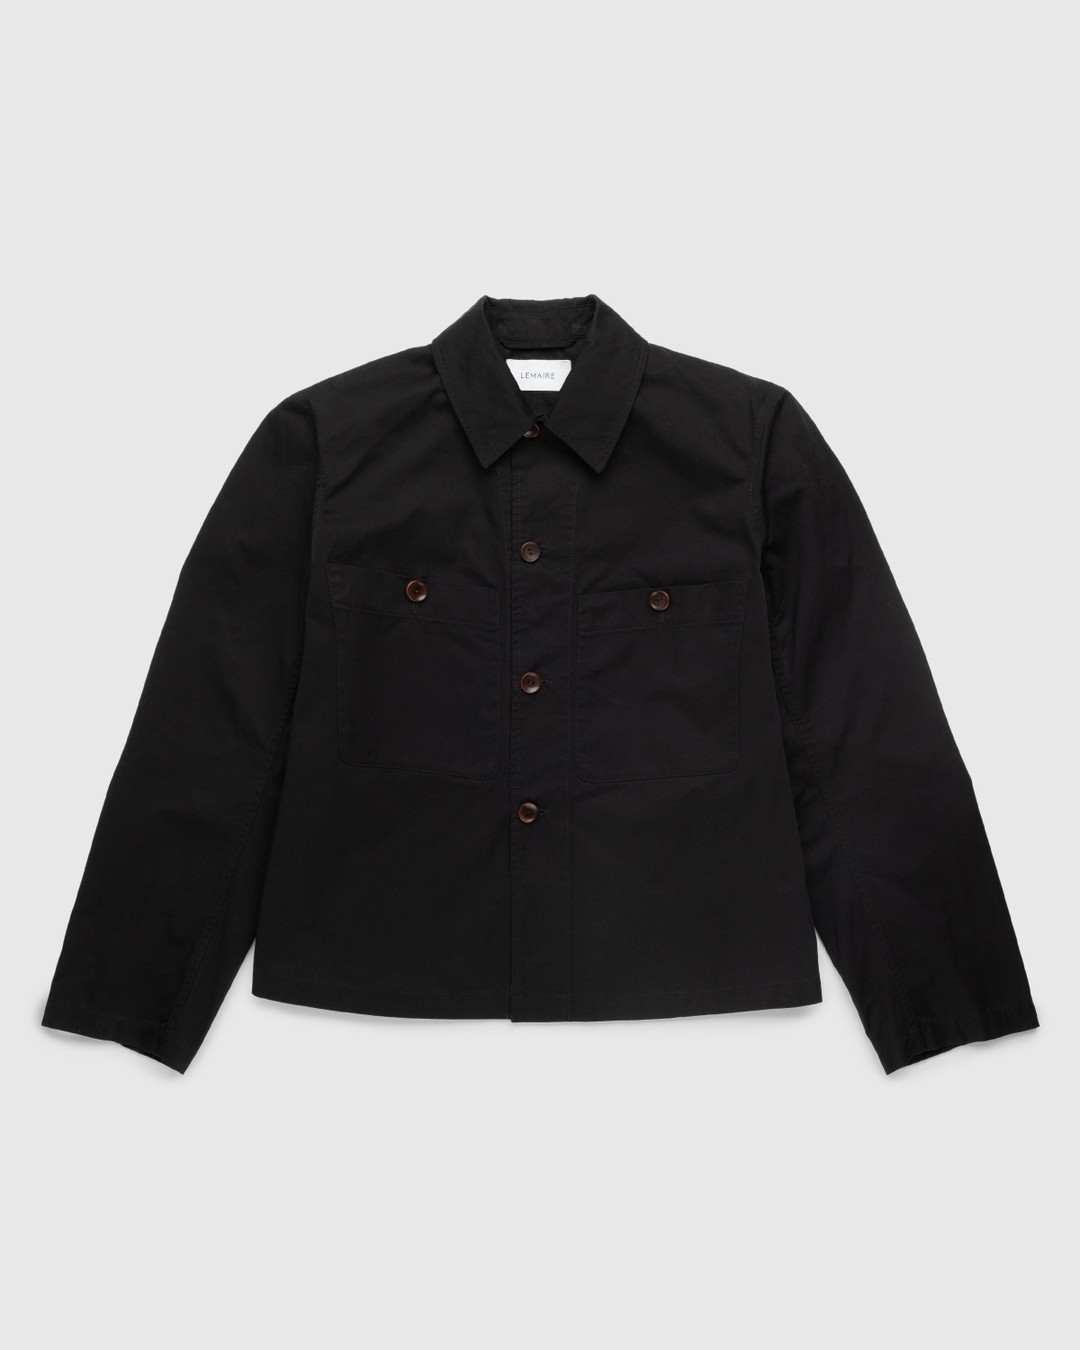 Lemaire – Military Overshirt Black - Outerwear - Black - Image 1